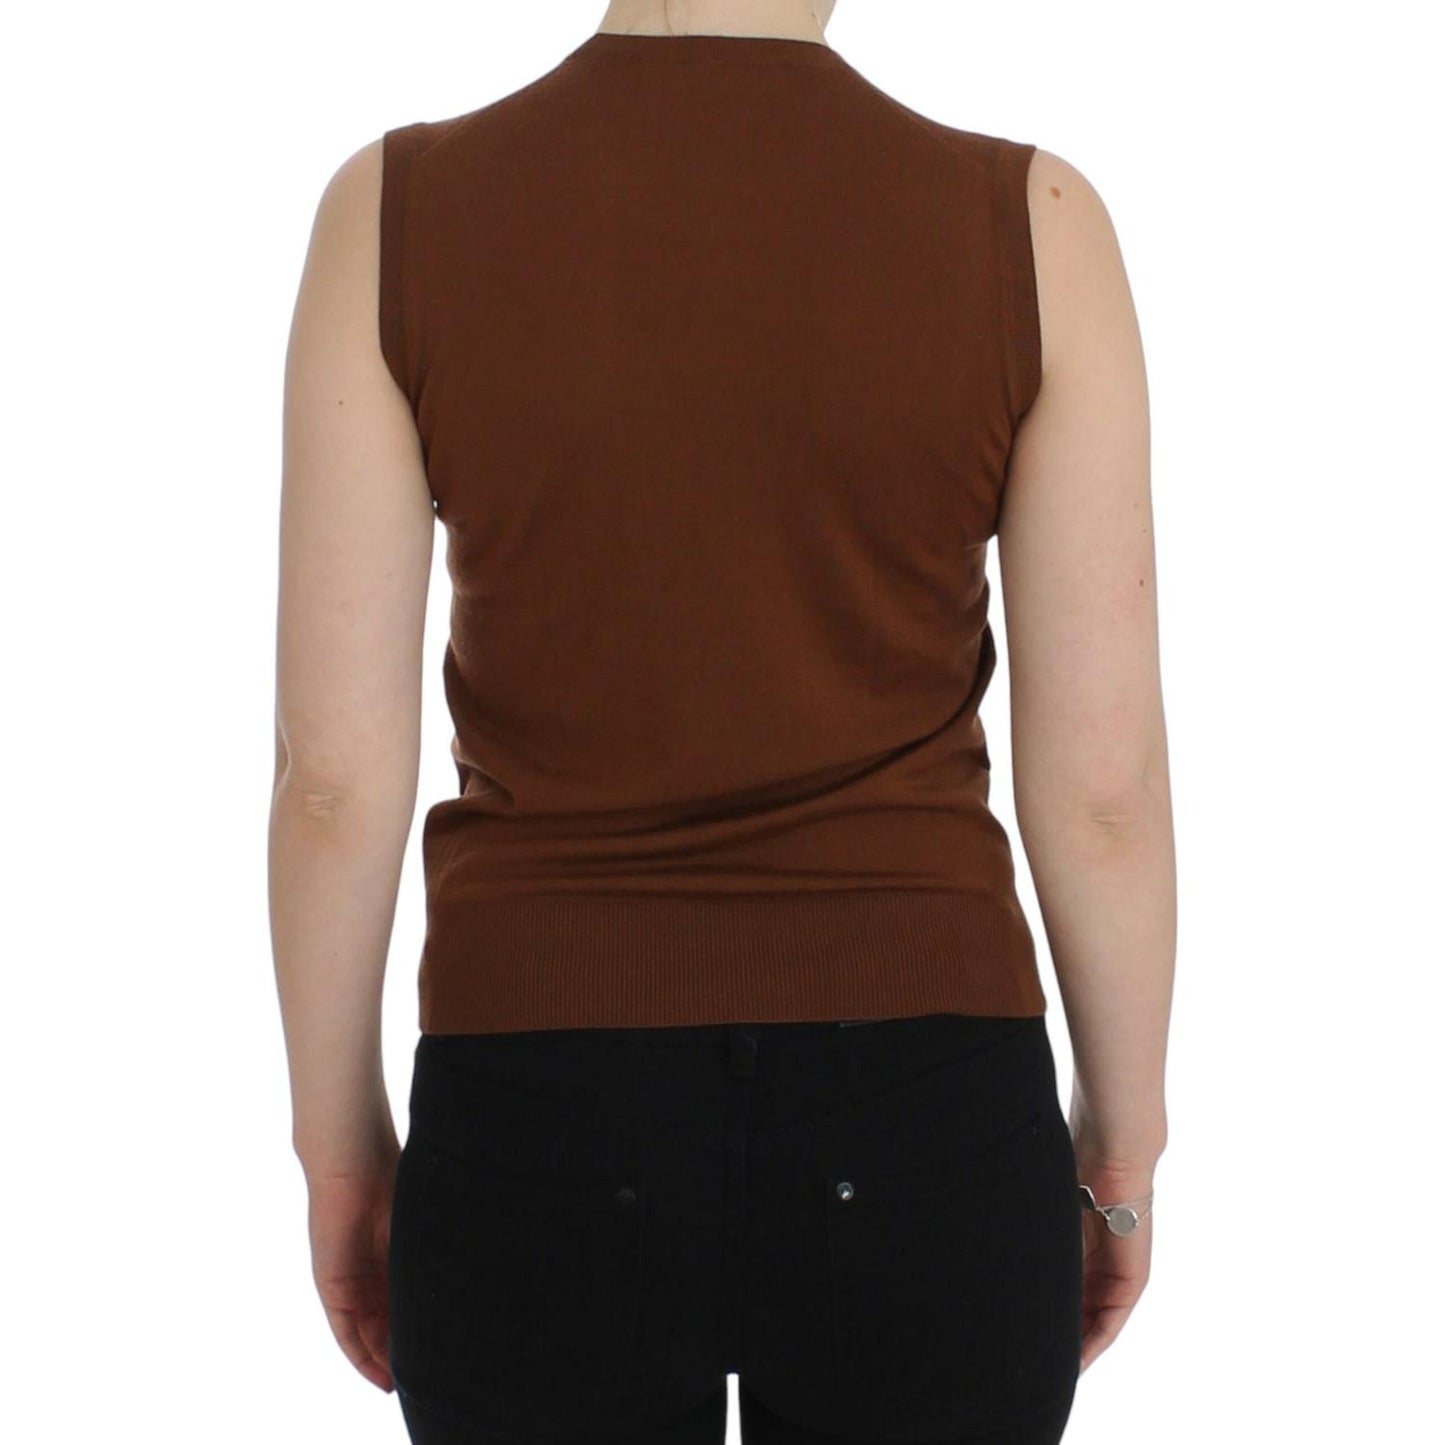 Dolce & Gabbana Timeless Wool and Lace Sleeveless Vest brown-wool-black-lace-vest-sweater-top